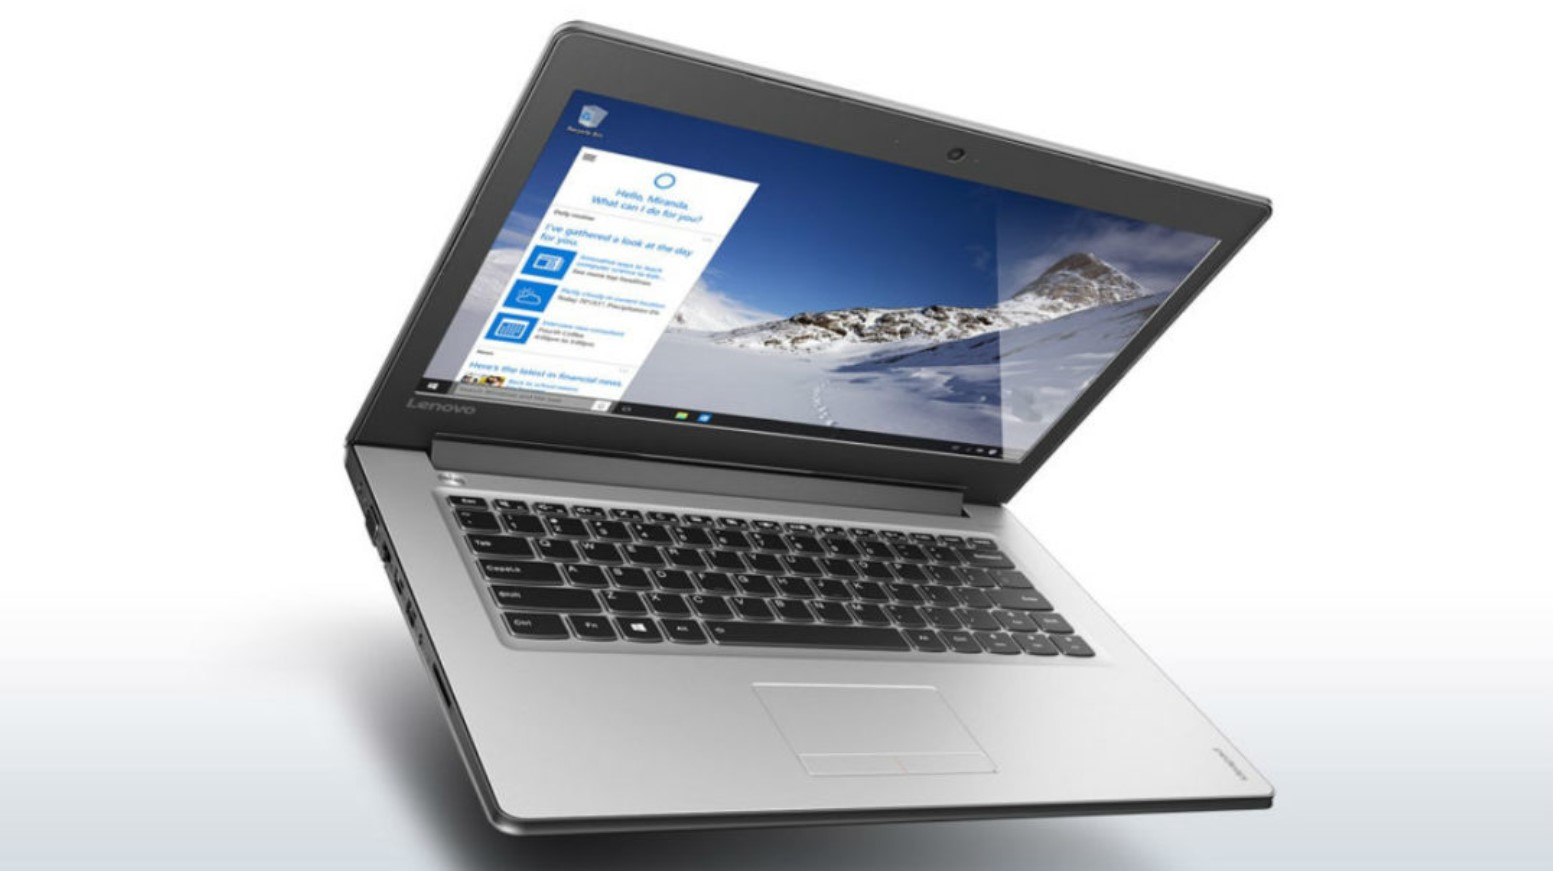 The 5 Key Features Of The Lenovo Ideapad 310